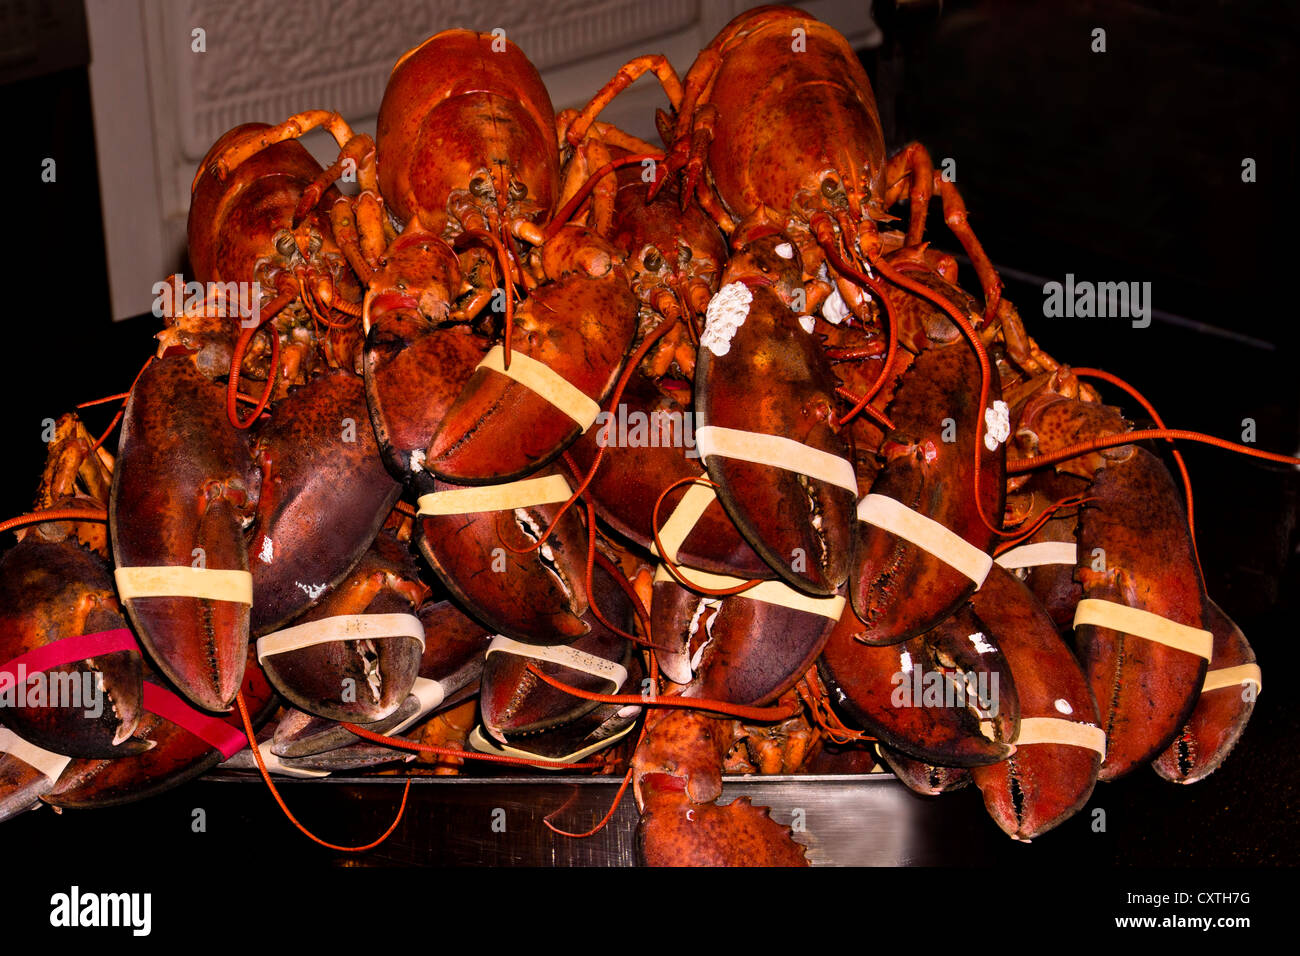 Numerous Cooked red lobsters in a pan ready to be eaten at party Stock Photo